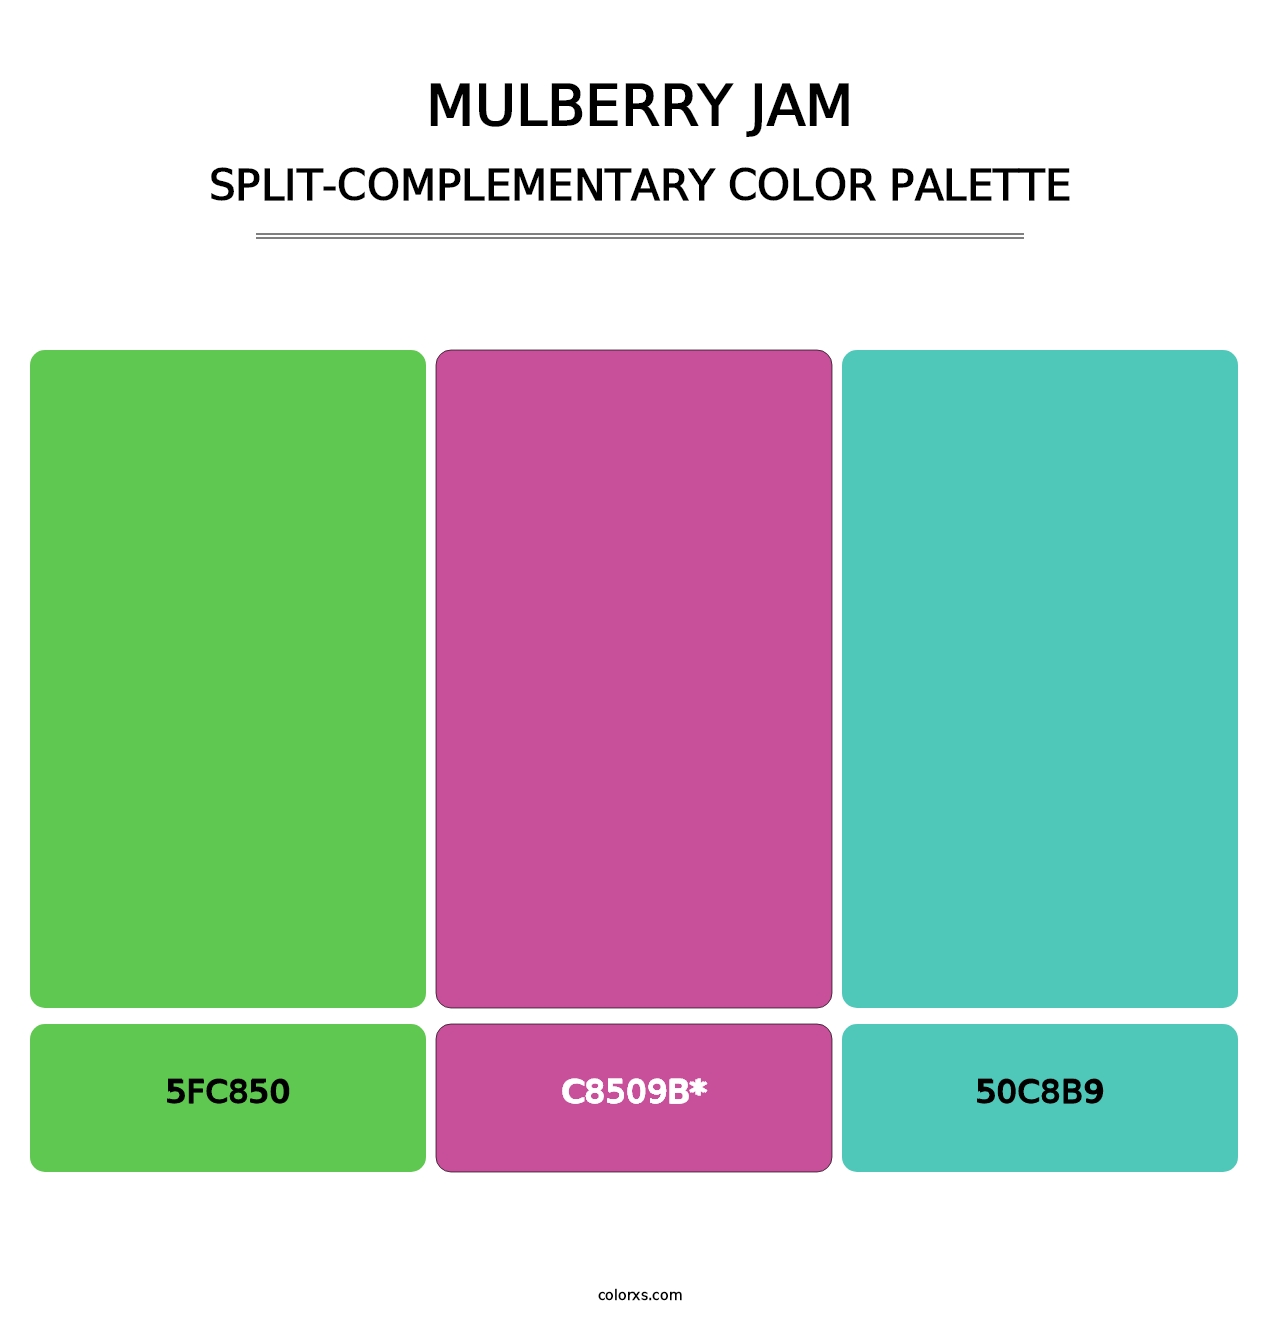 Mulberry Jam - Split-Complementary Color Palette